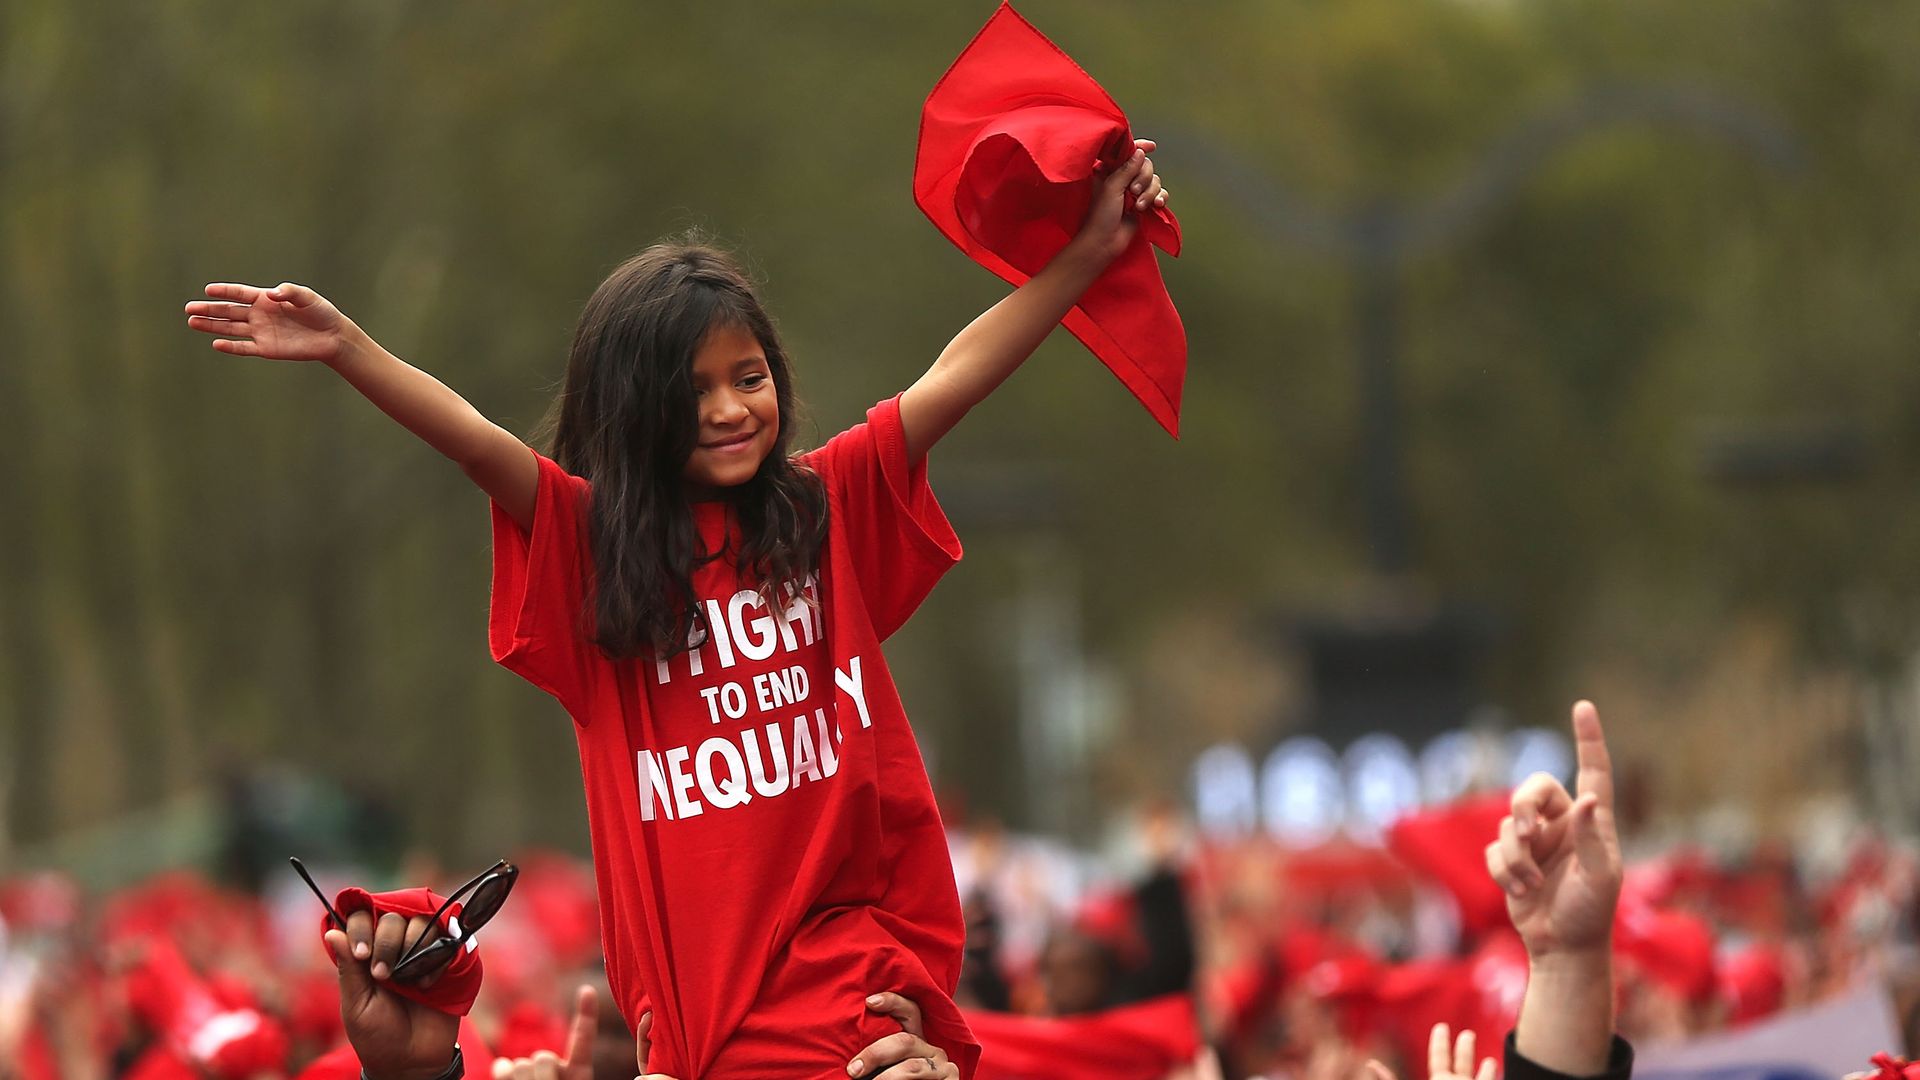 A Latina child raises her hands in the air and she is carried during a rally in Brooklyn over education inequality in New York City. 